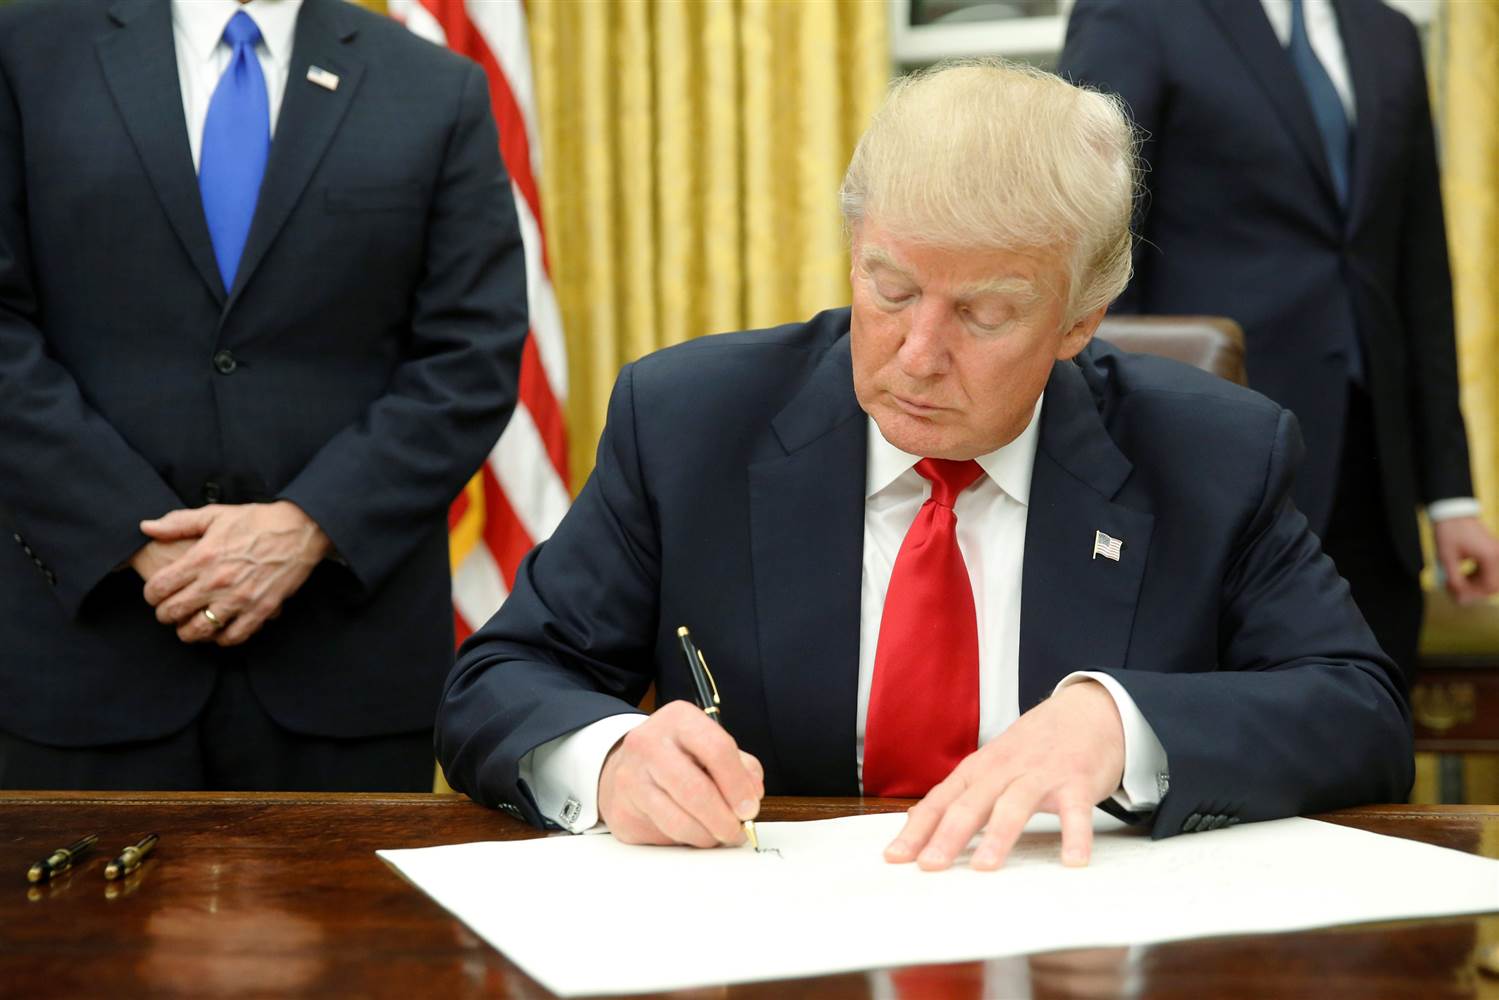 Trump Signing the Executive Order